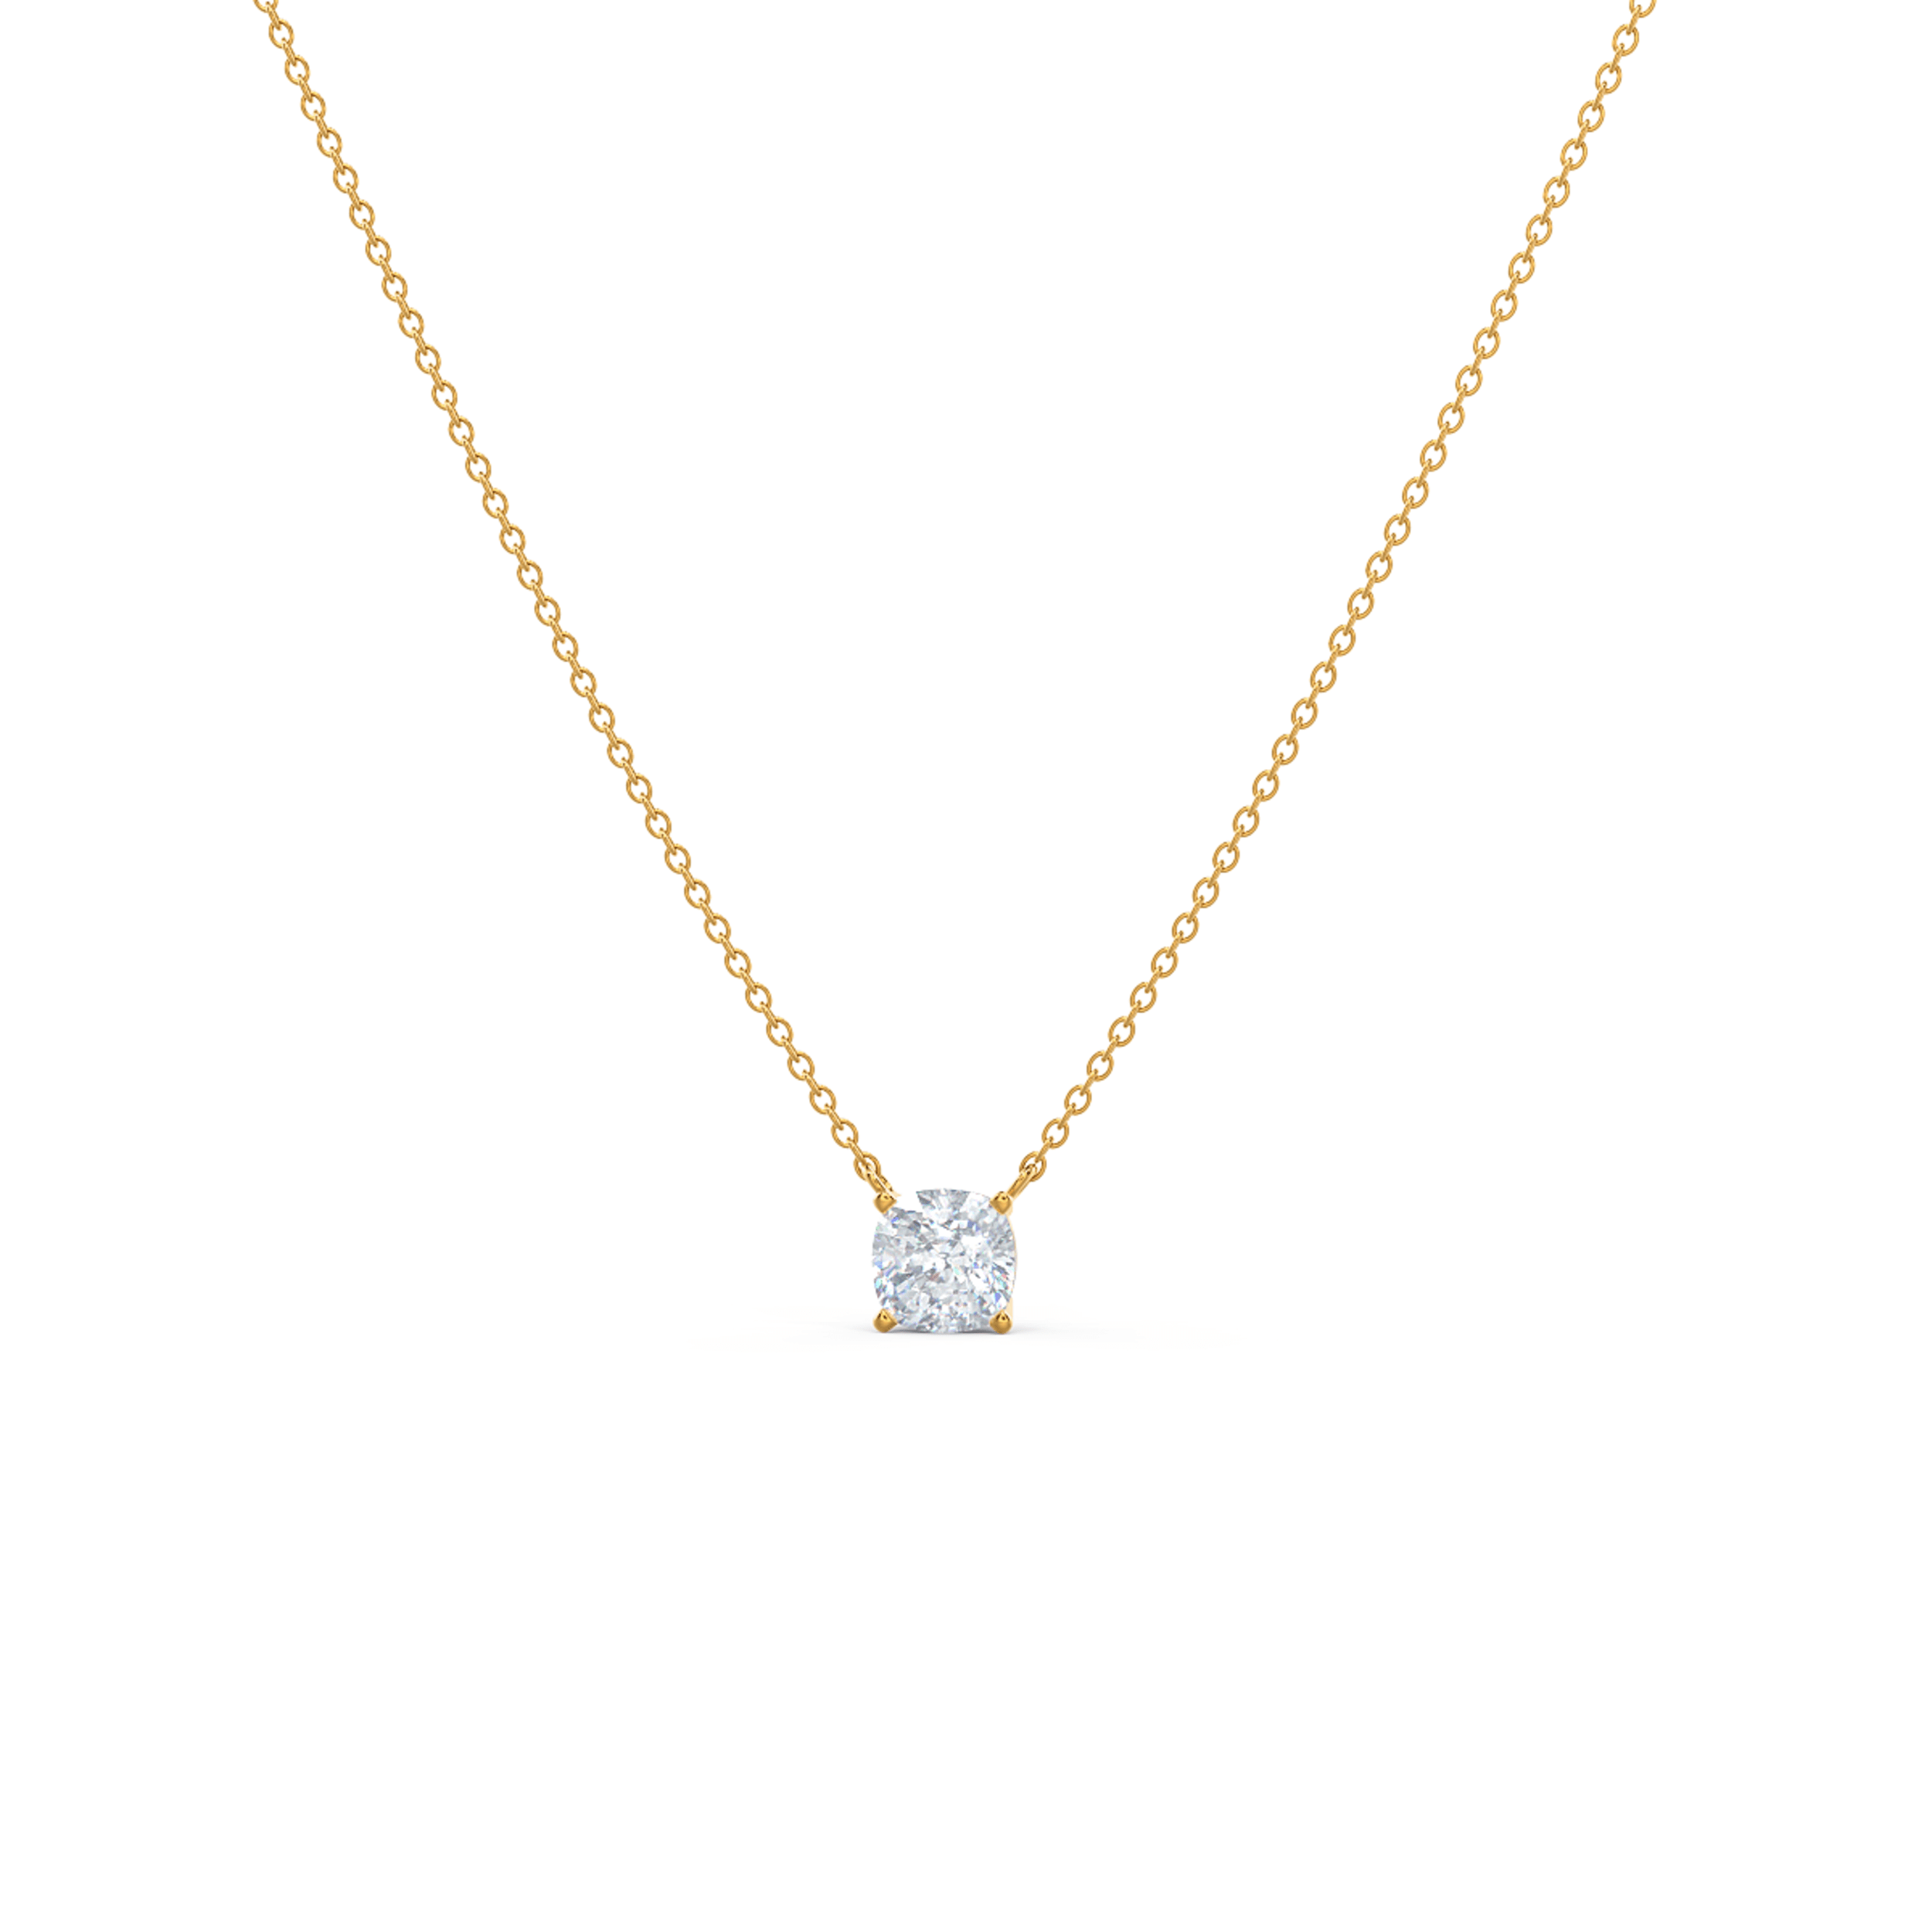 1.0 ct Synthetic Diamonds set in 14k Yellow Gold Floating Cushion Pendant